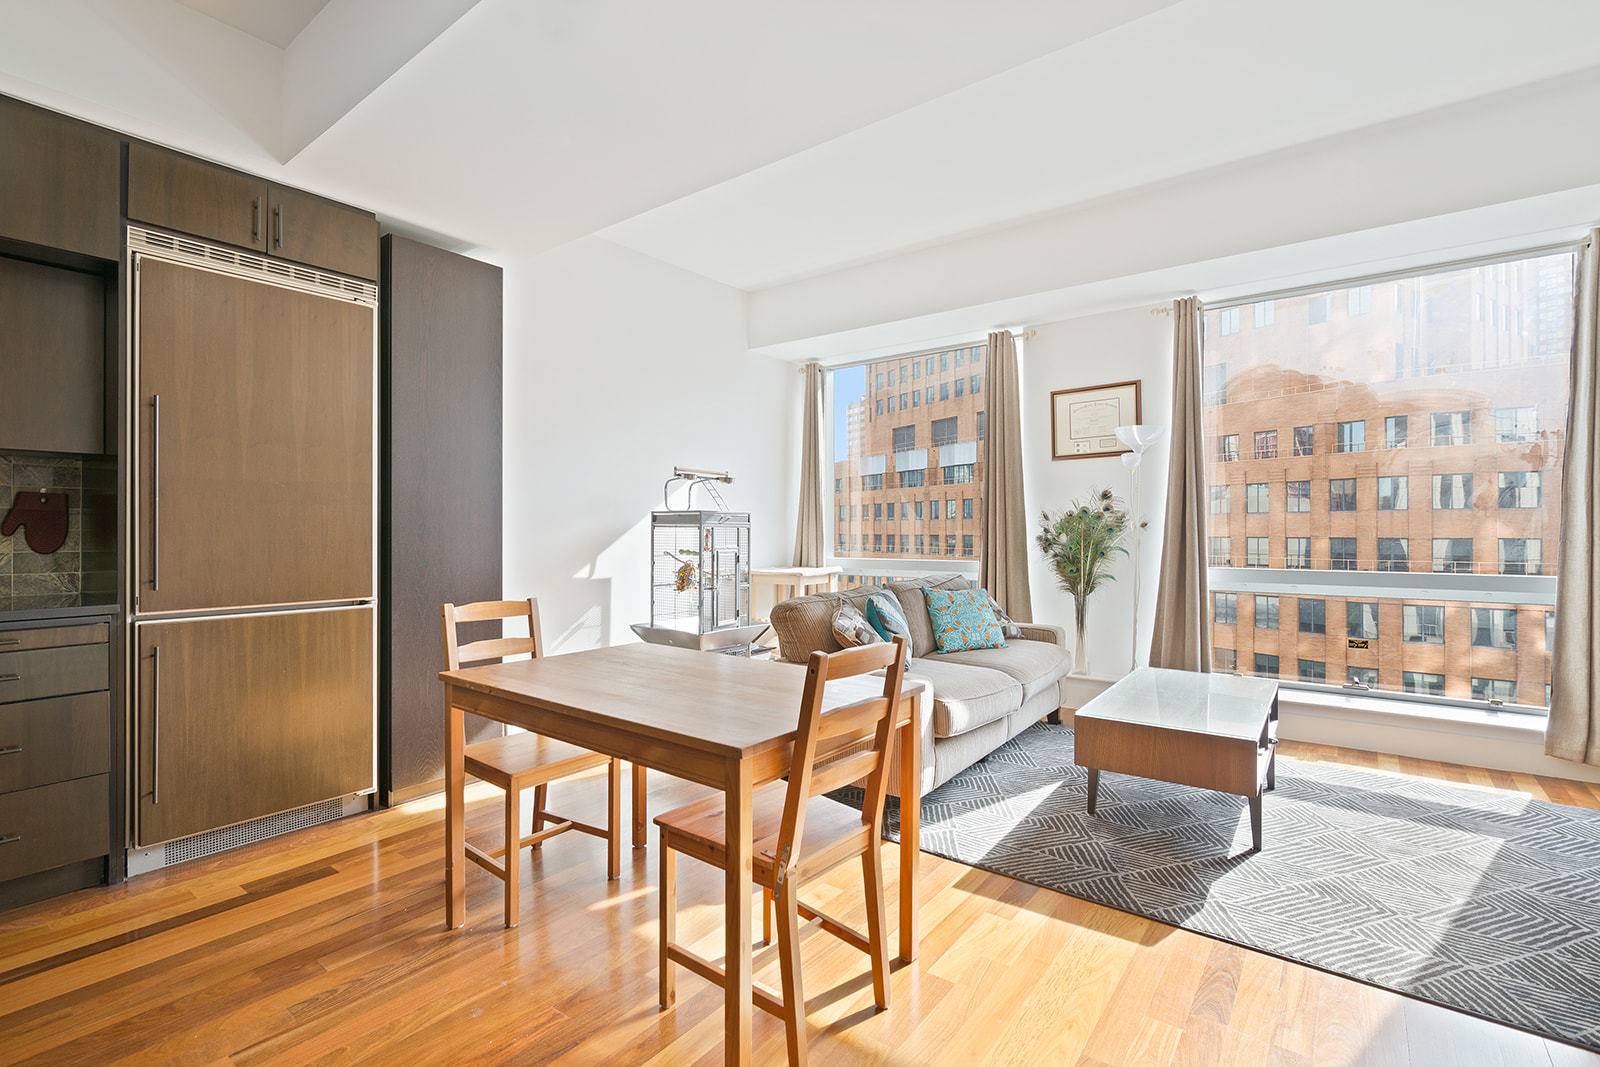 CONTACT EXCLUSIVE AGENT FOR ADDITIONAL VIRTUAL TOURS NO BROKER FEE Spacious and bright large one bedroom, with huge floor to ceiling windows and high 10FT ceilings.